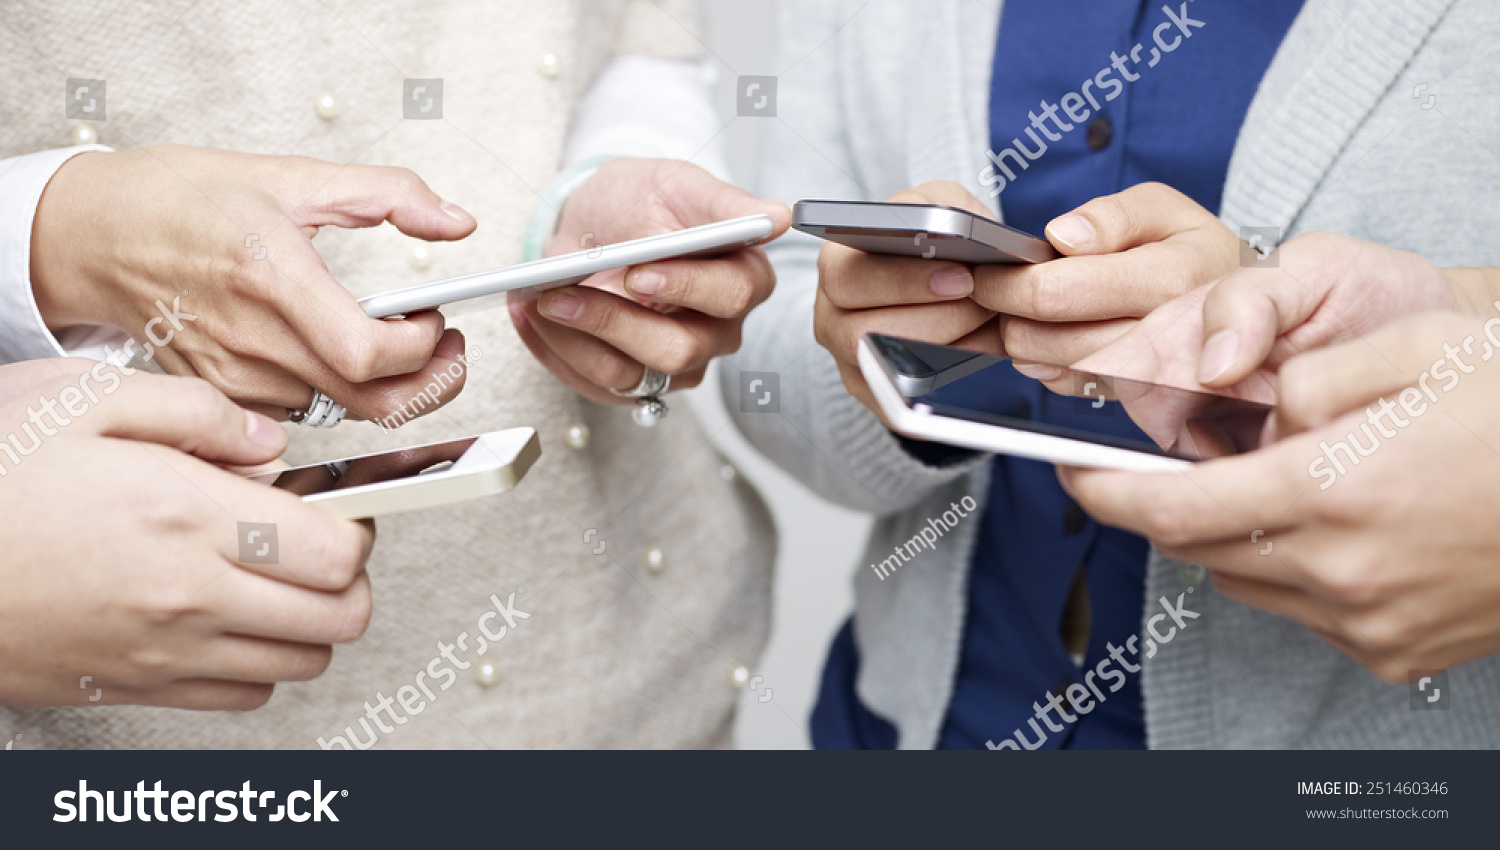 small group of people using cellphones together. #251460346